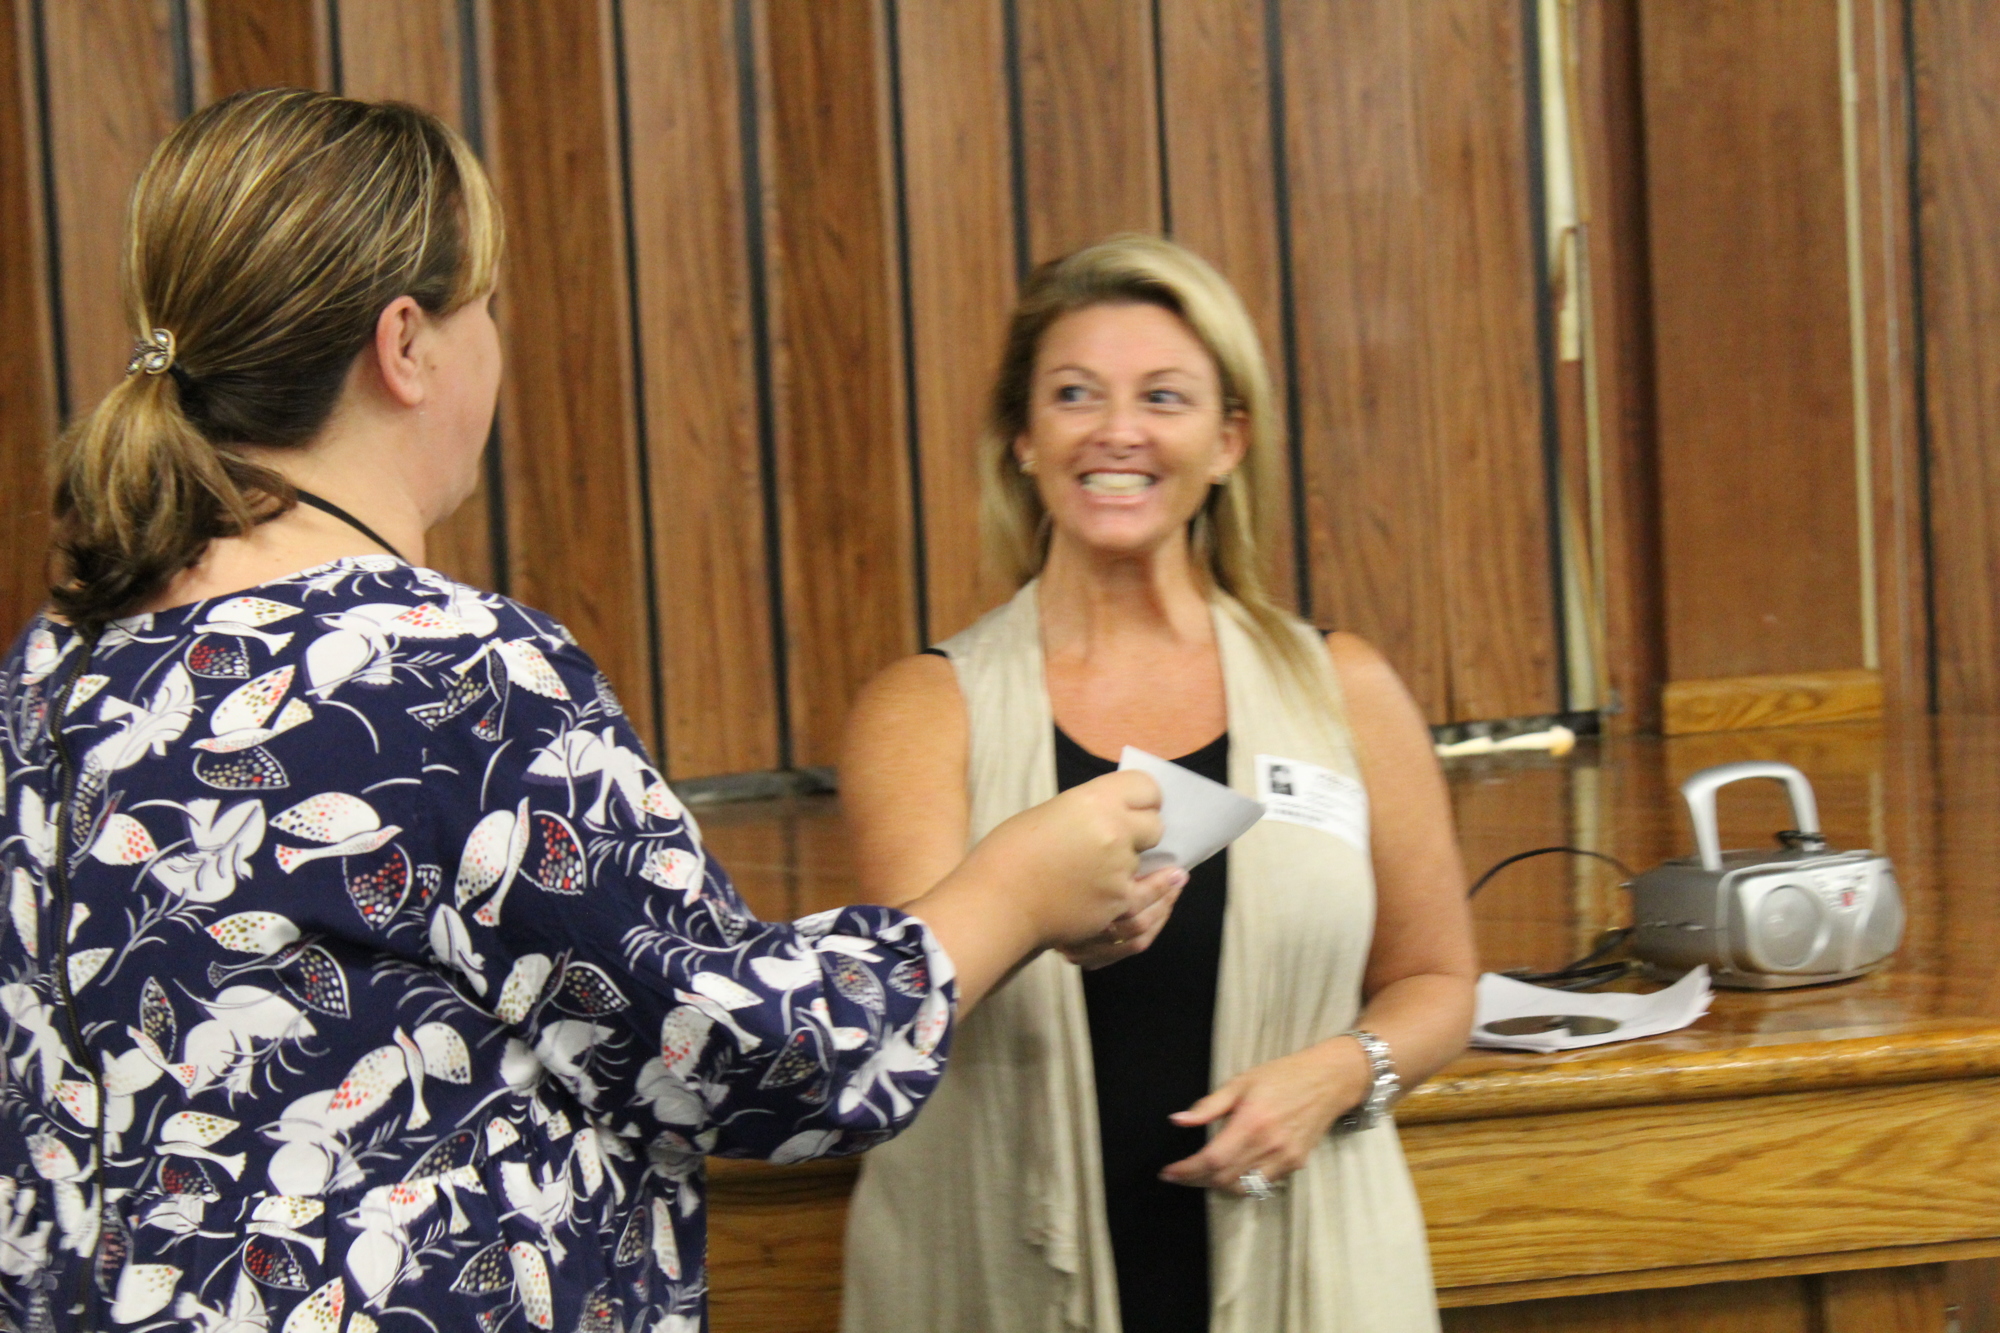 Jenna Pender presents Light The Way's Angela Heaster with a $375  at the Tomoka Elementary multipurpose room on Friday, Oct. 20. Photo by Jarleene Almenas